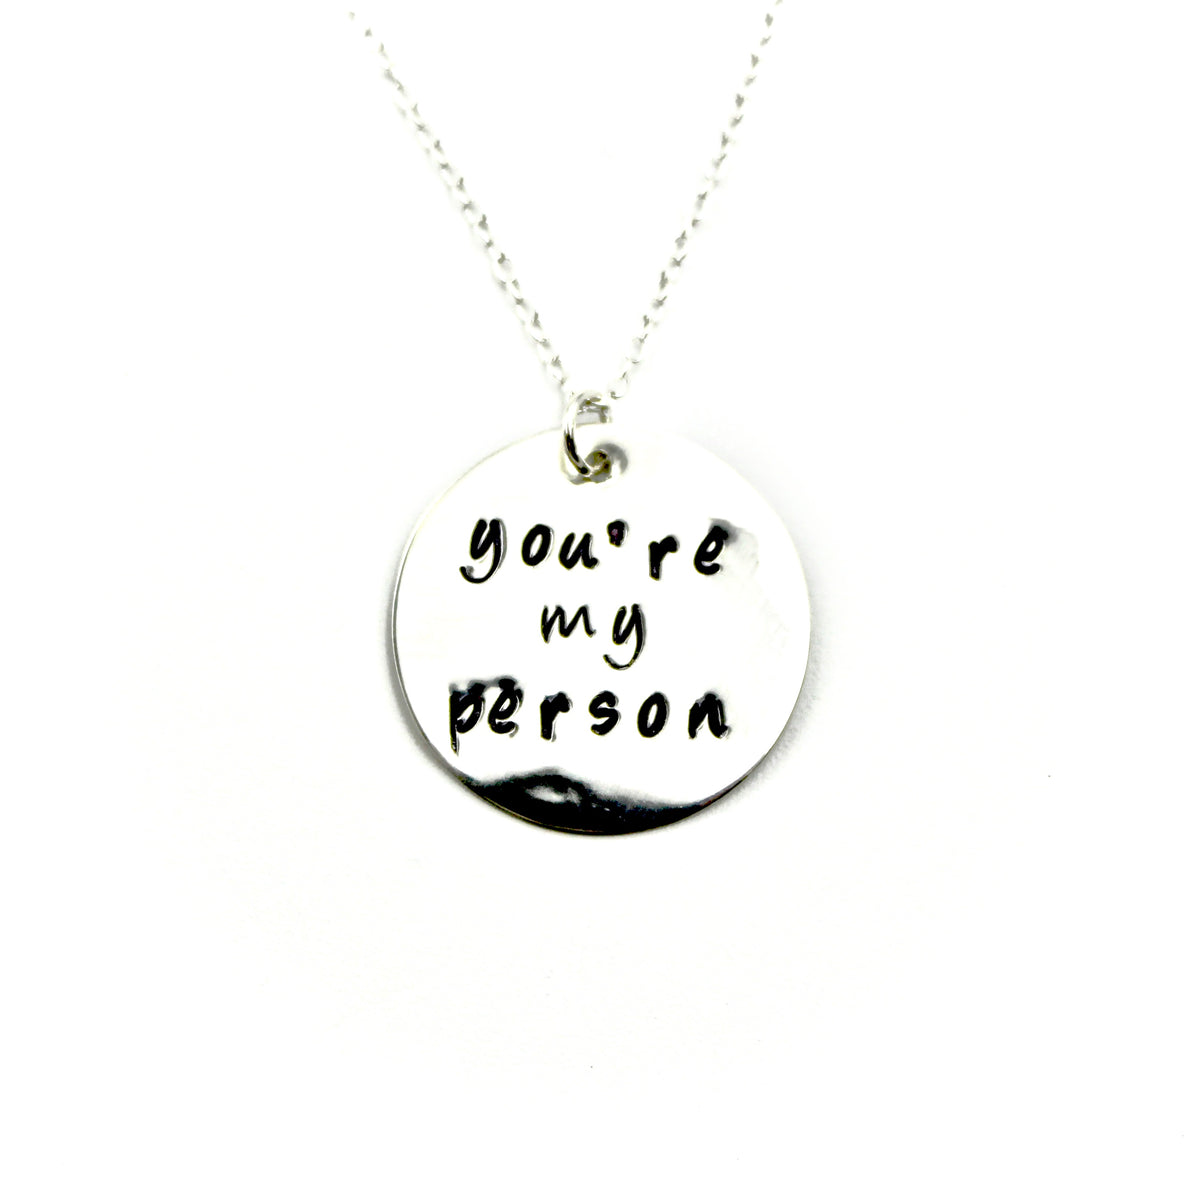 You're my person Necklace